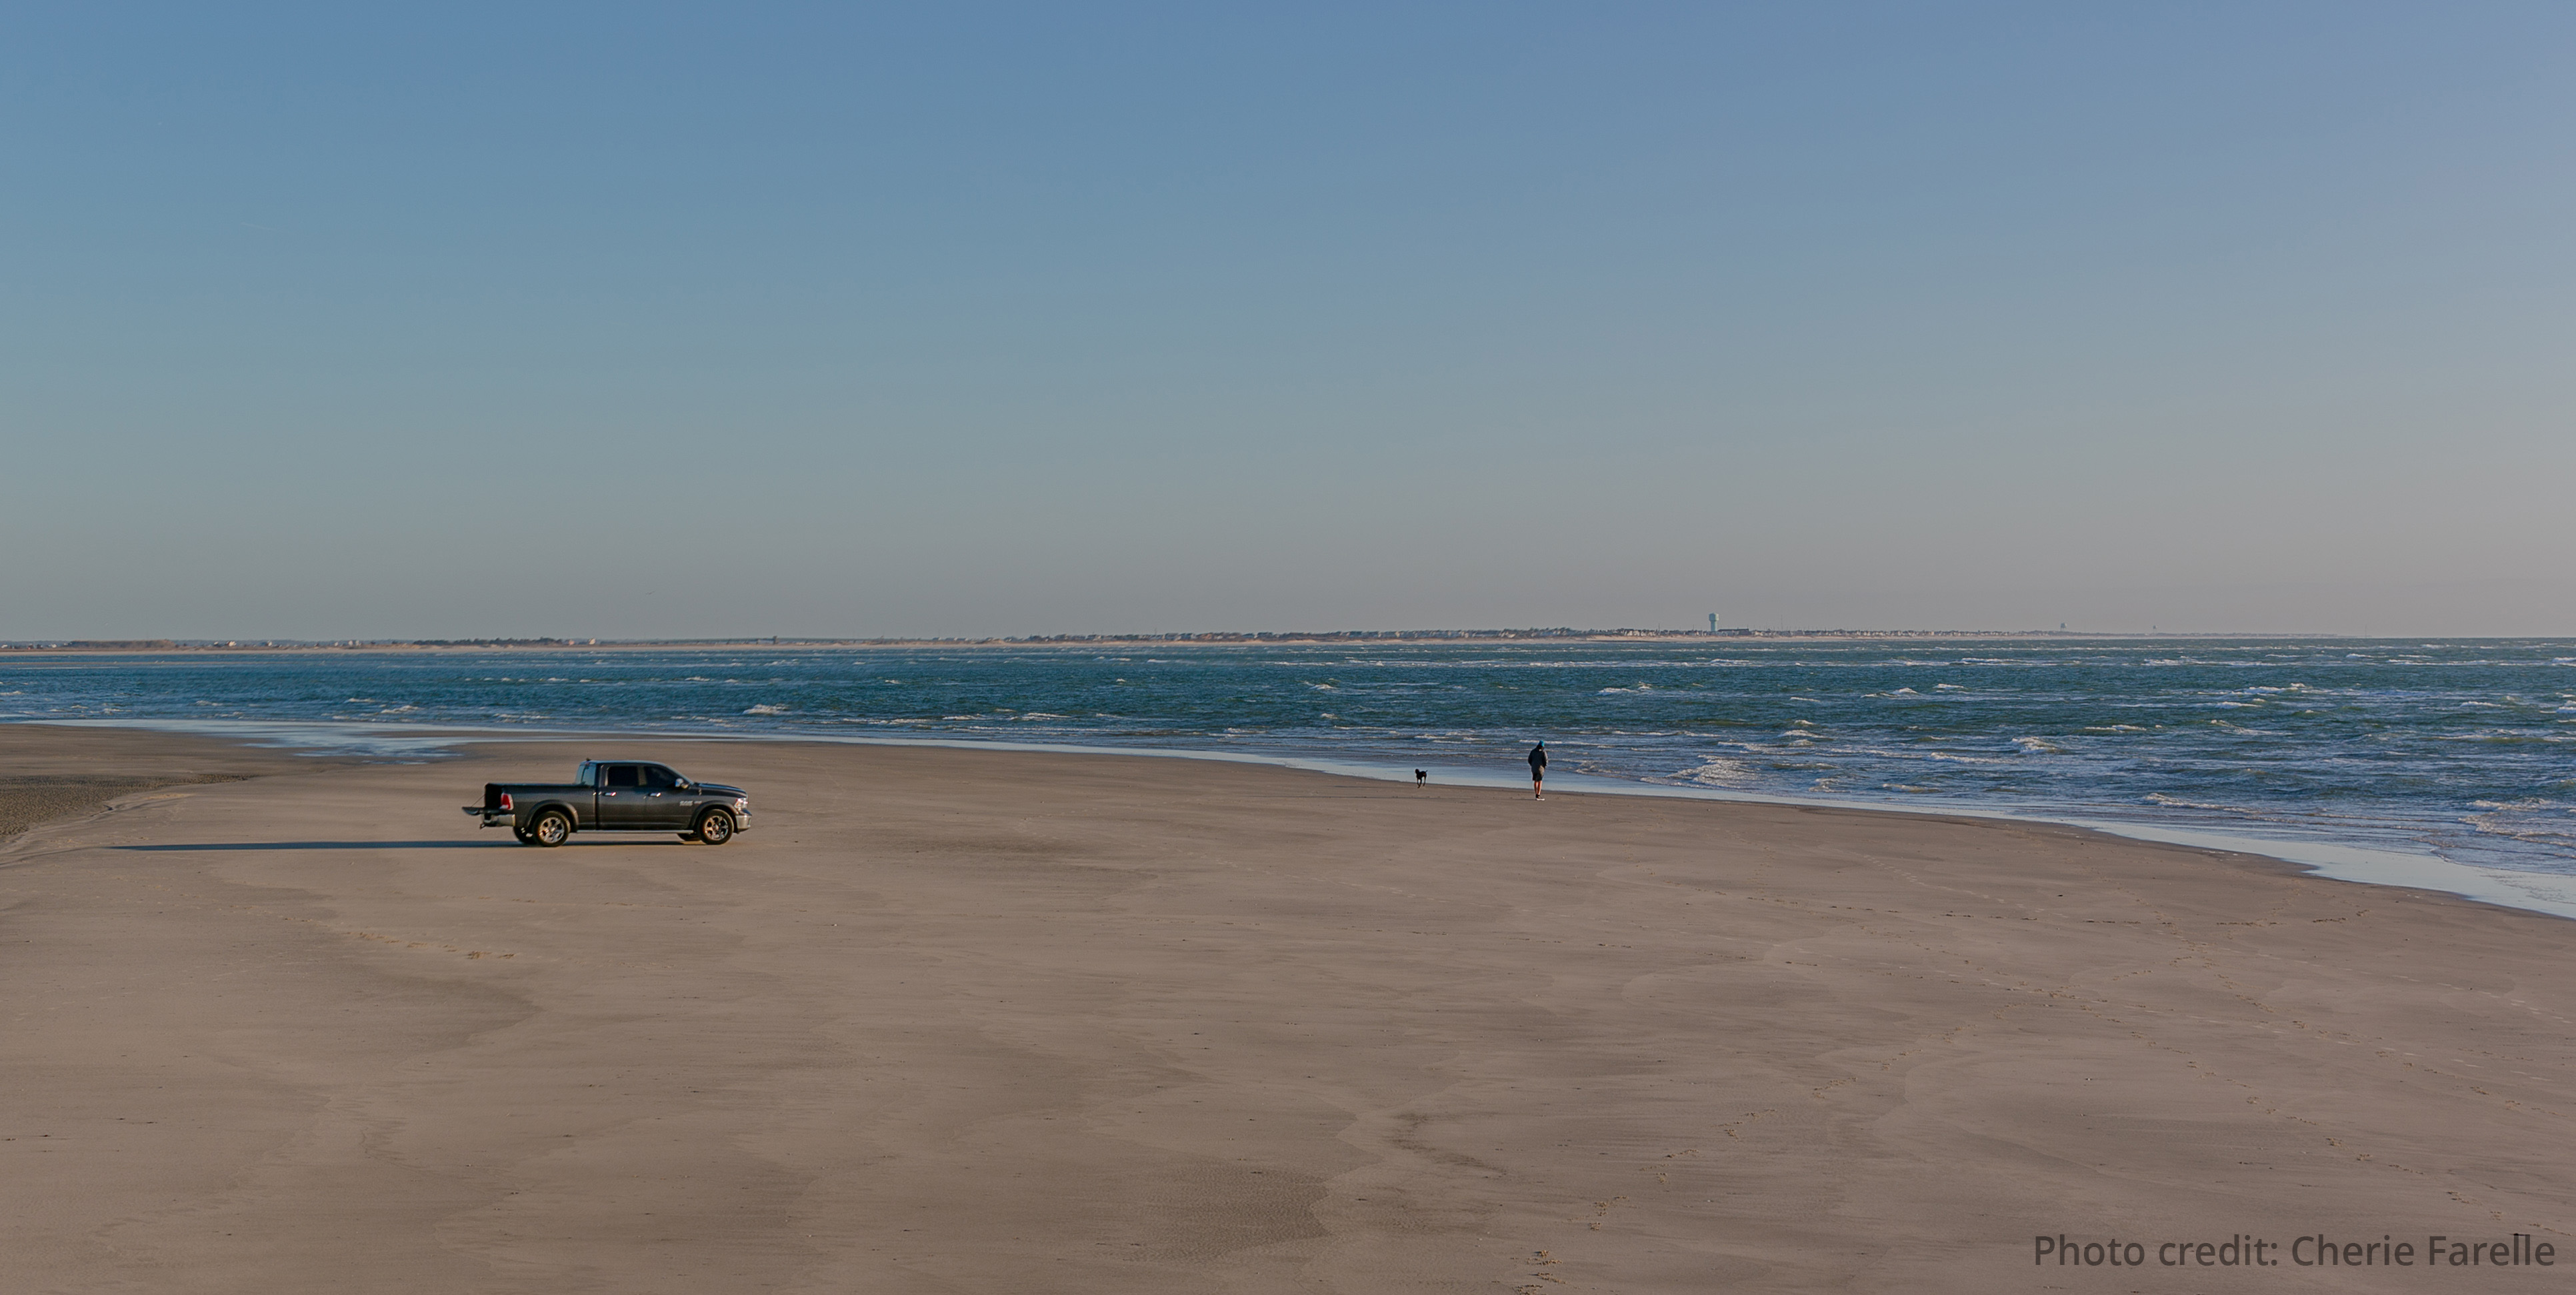 A truck sits parked on the beach as a person stands near the ocean waves.